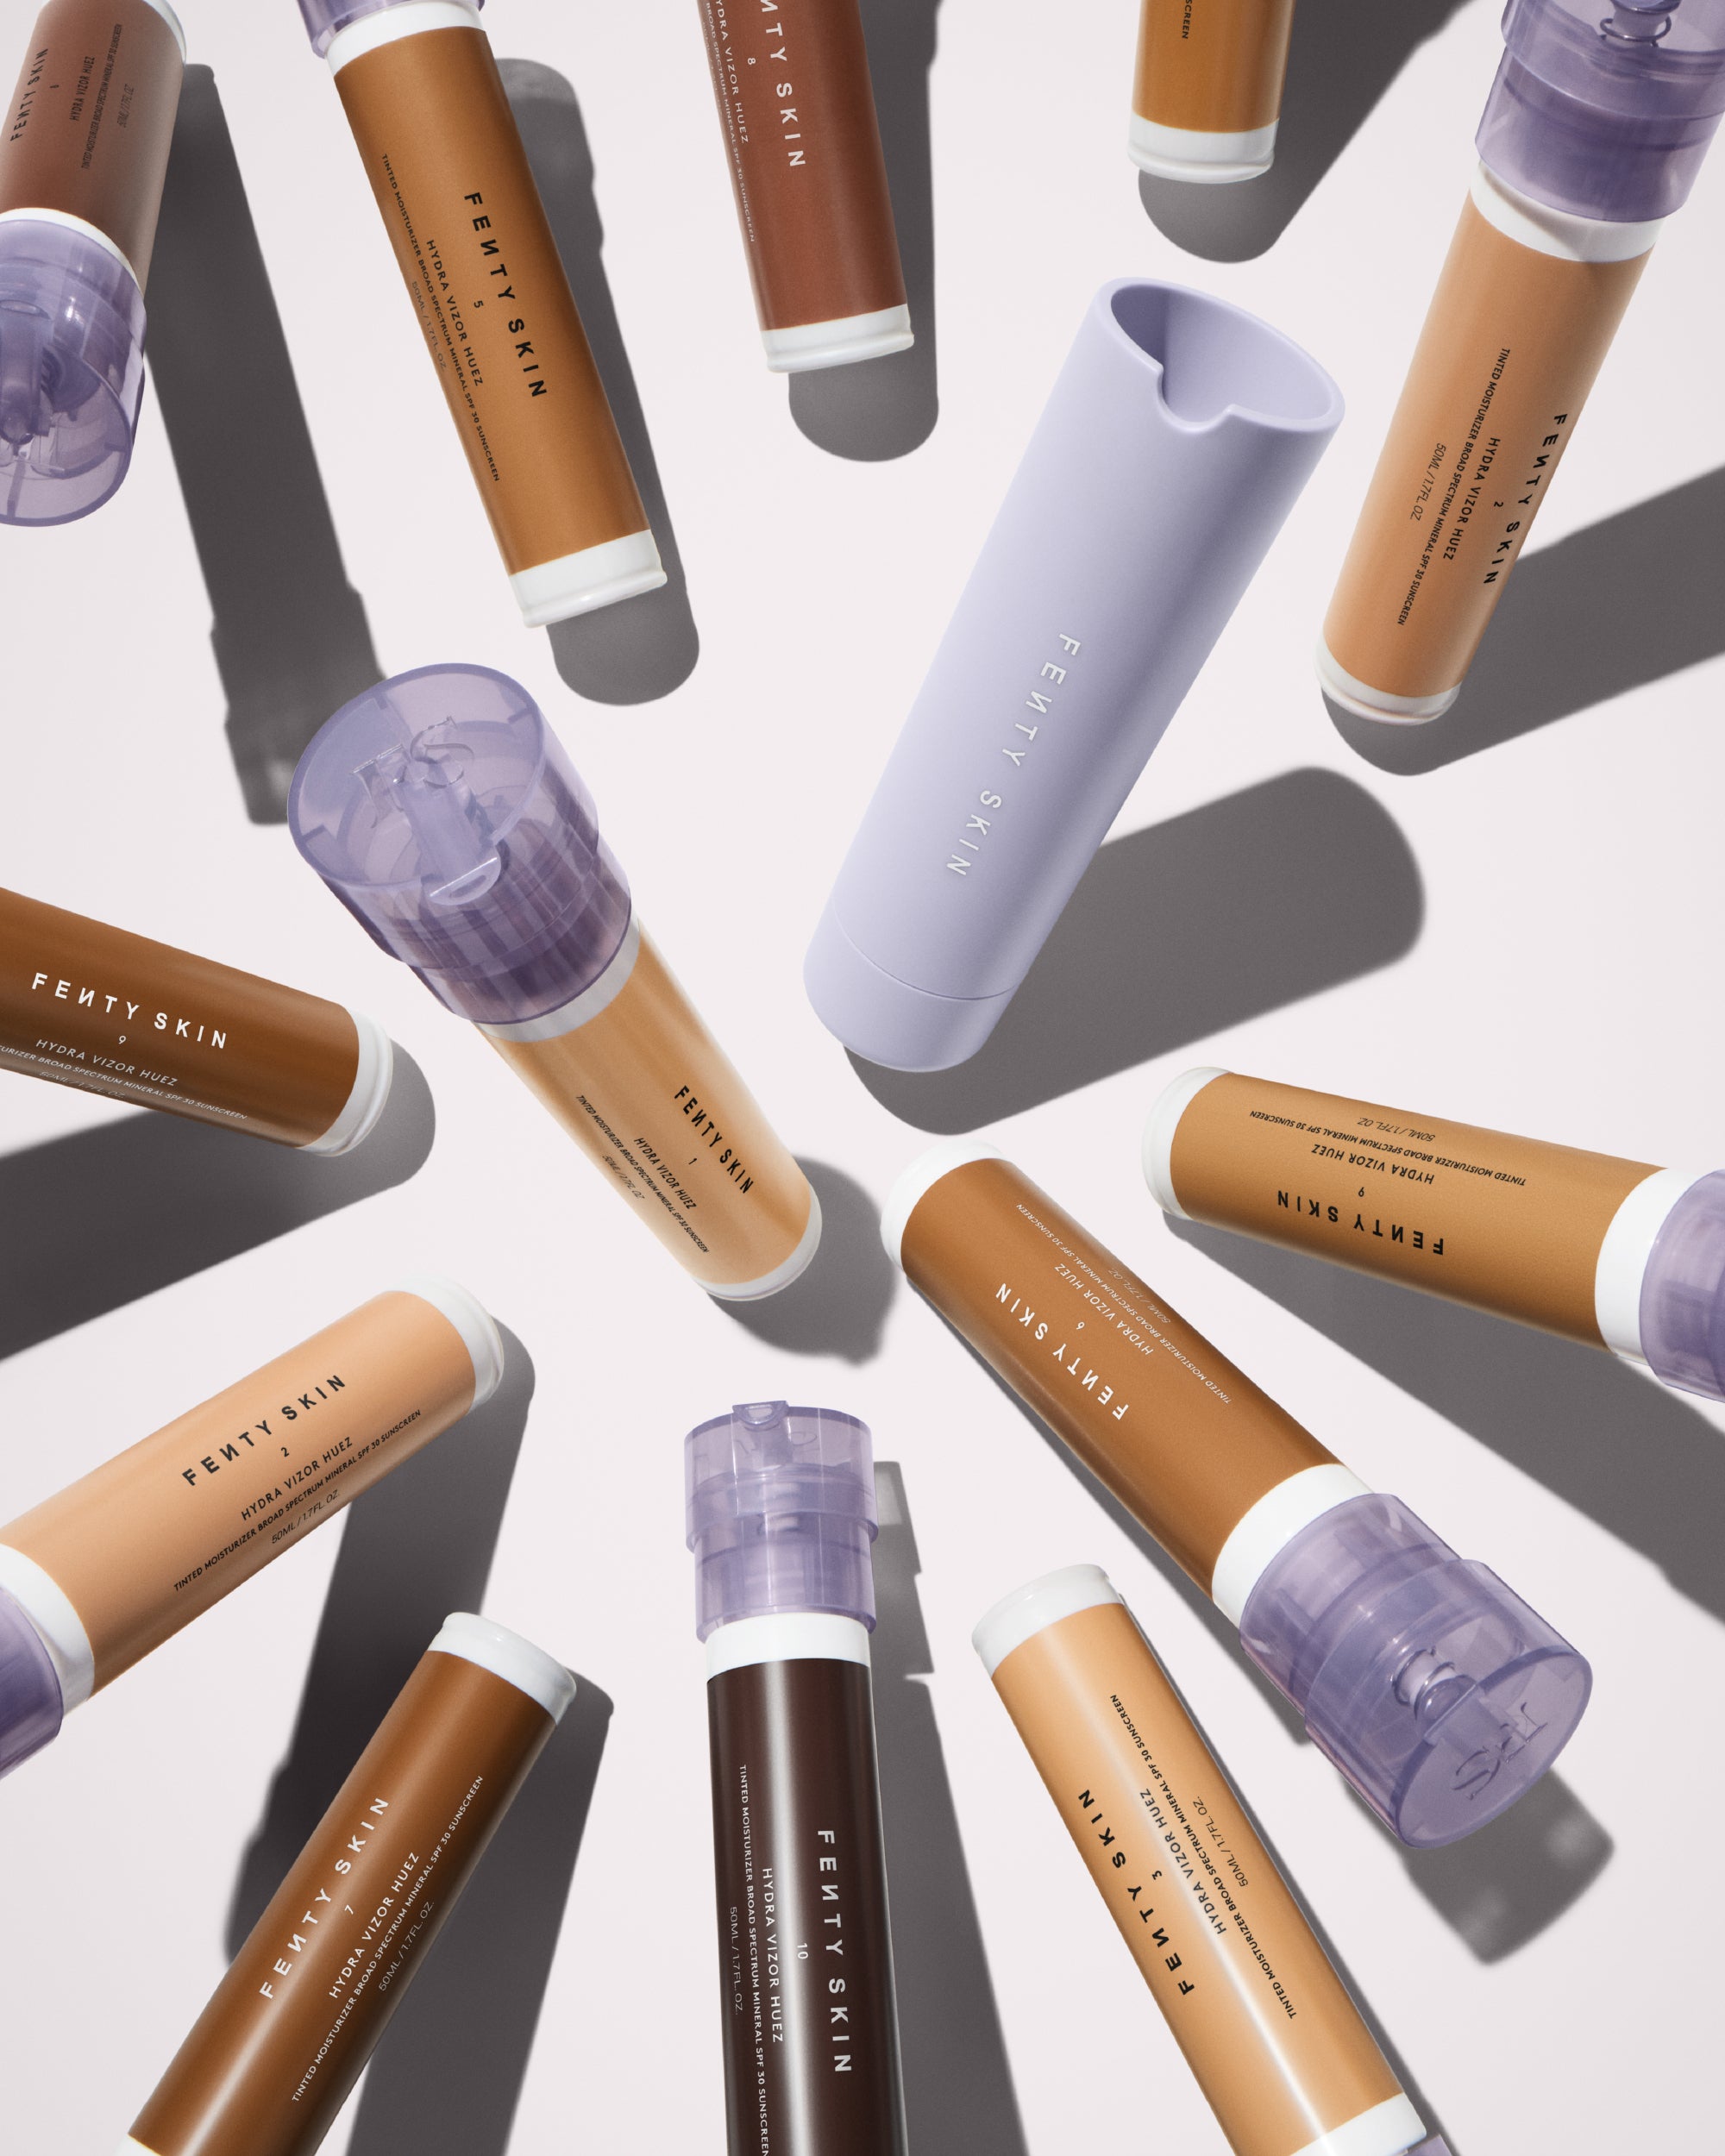 Say Goodbye To White Casts With Fenty Beauty’s New Tinted SPF